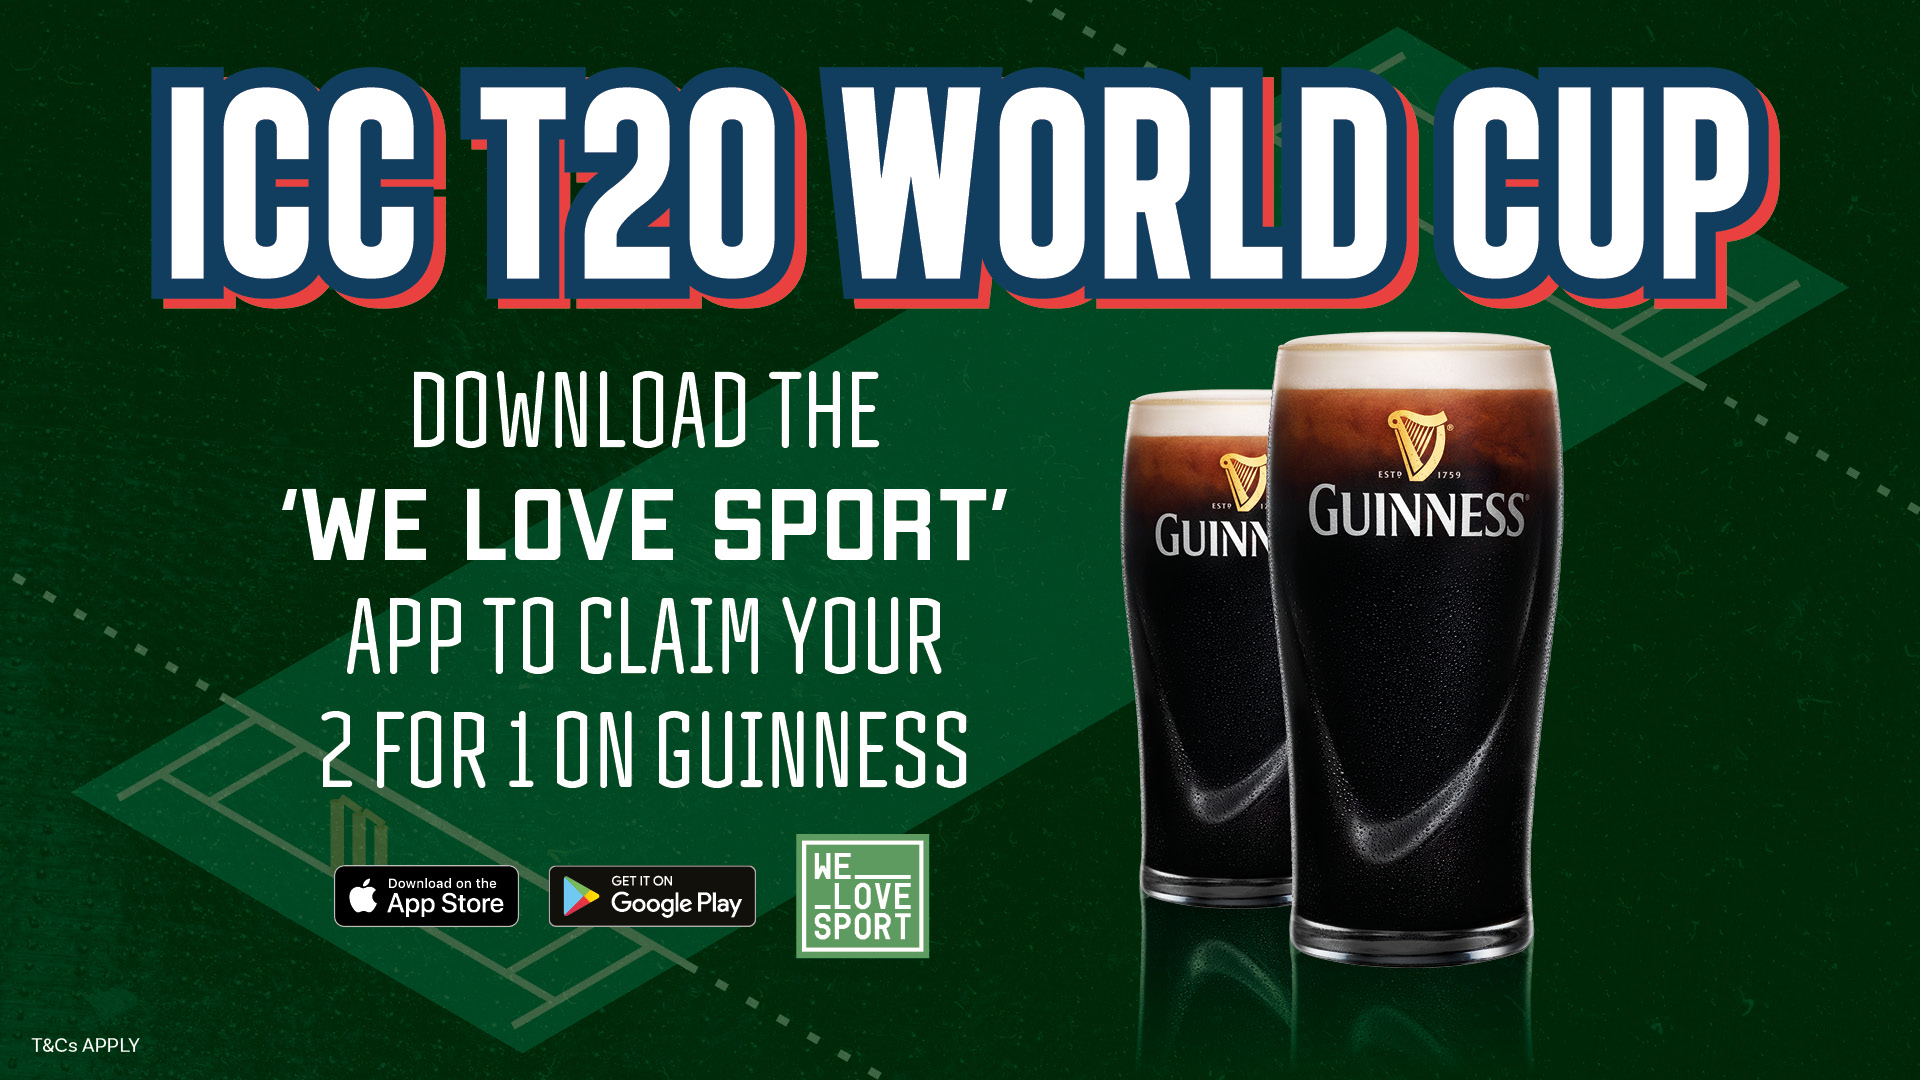 2 for 1 Guinness for the ICC T20 World Cup with We Love Sport